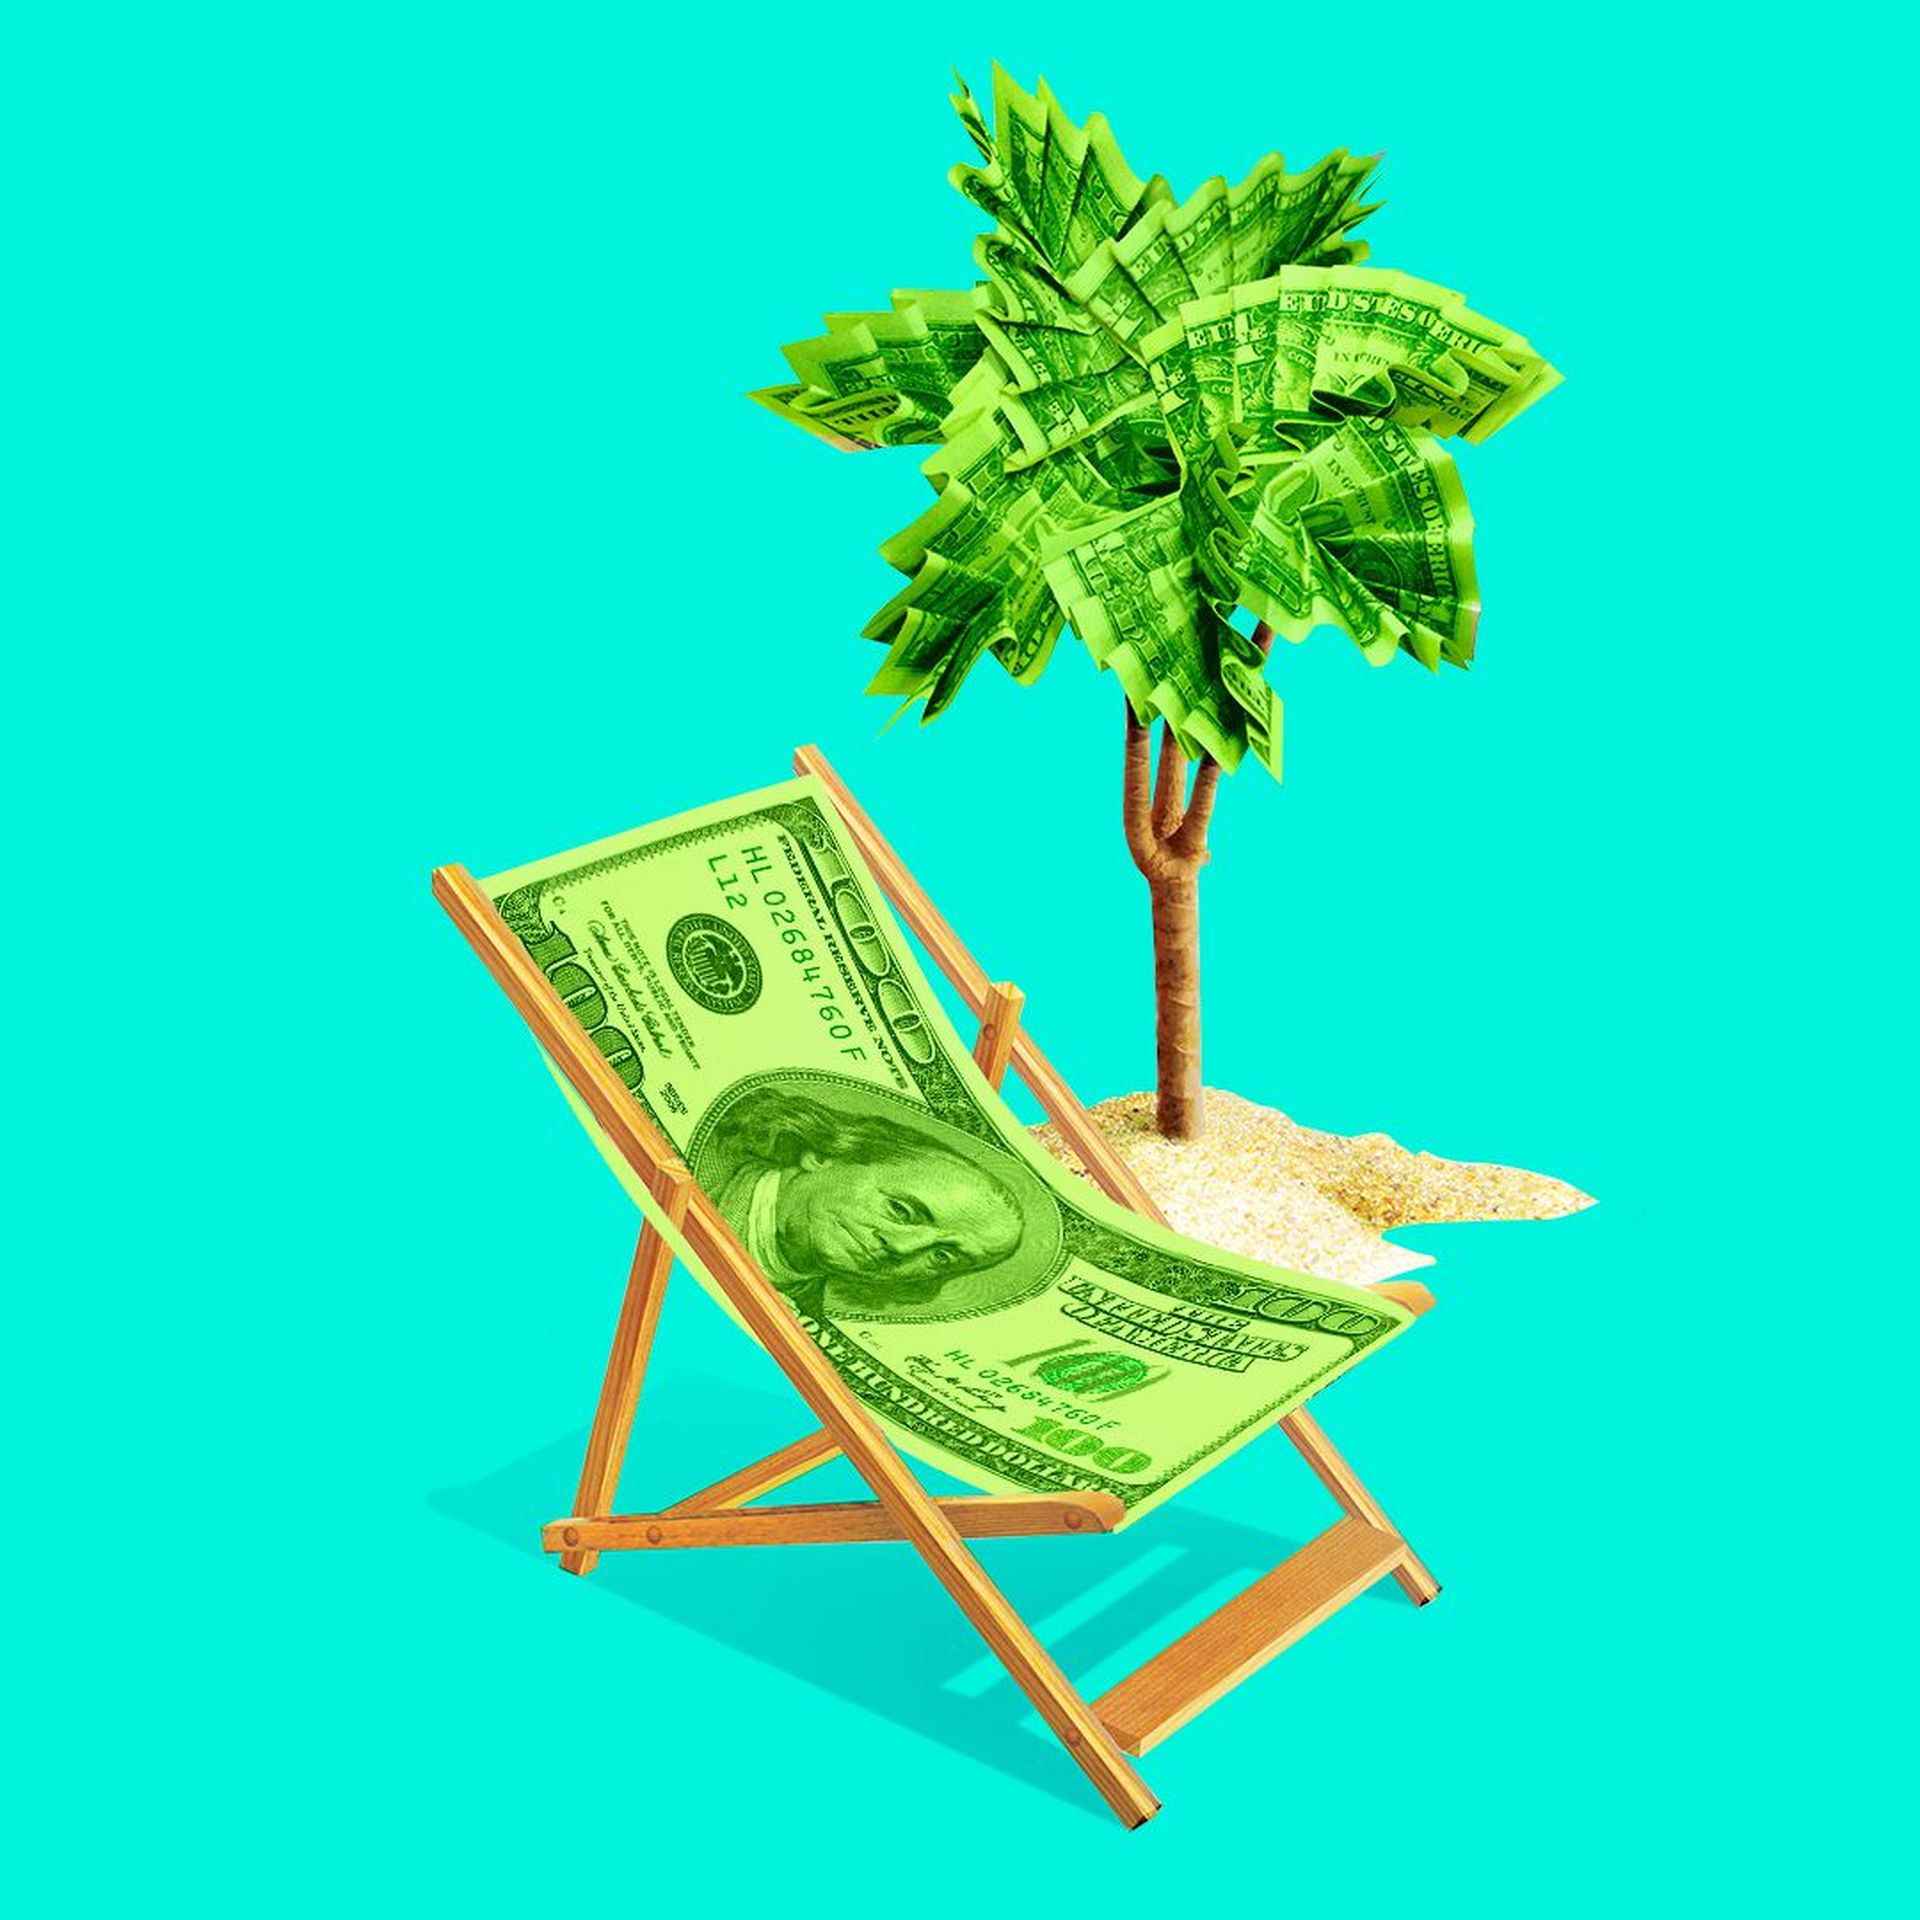 Illustration of a beach chair and palm tree made out of money.